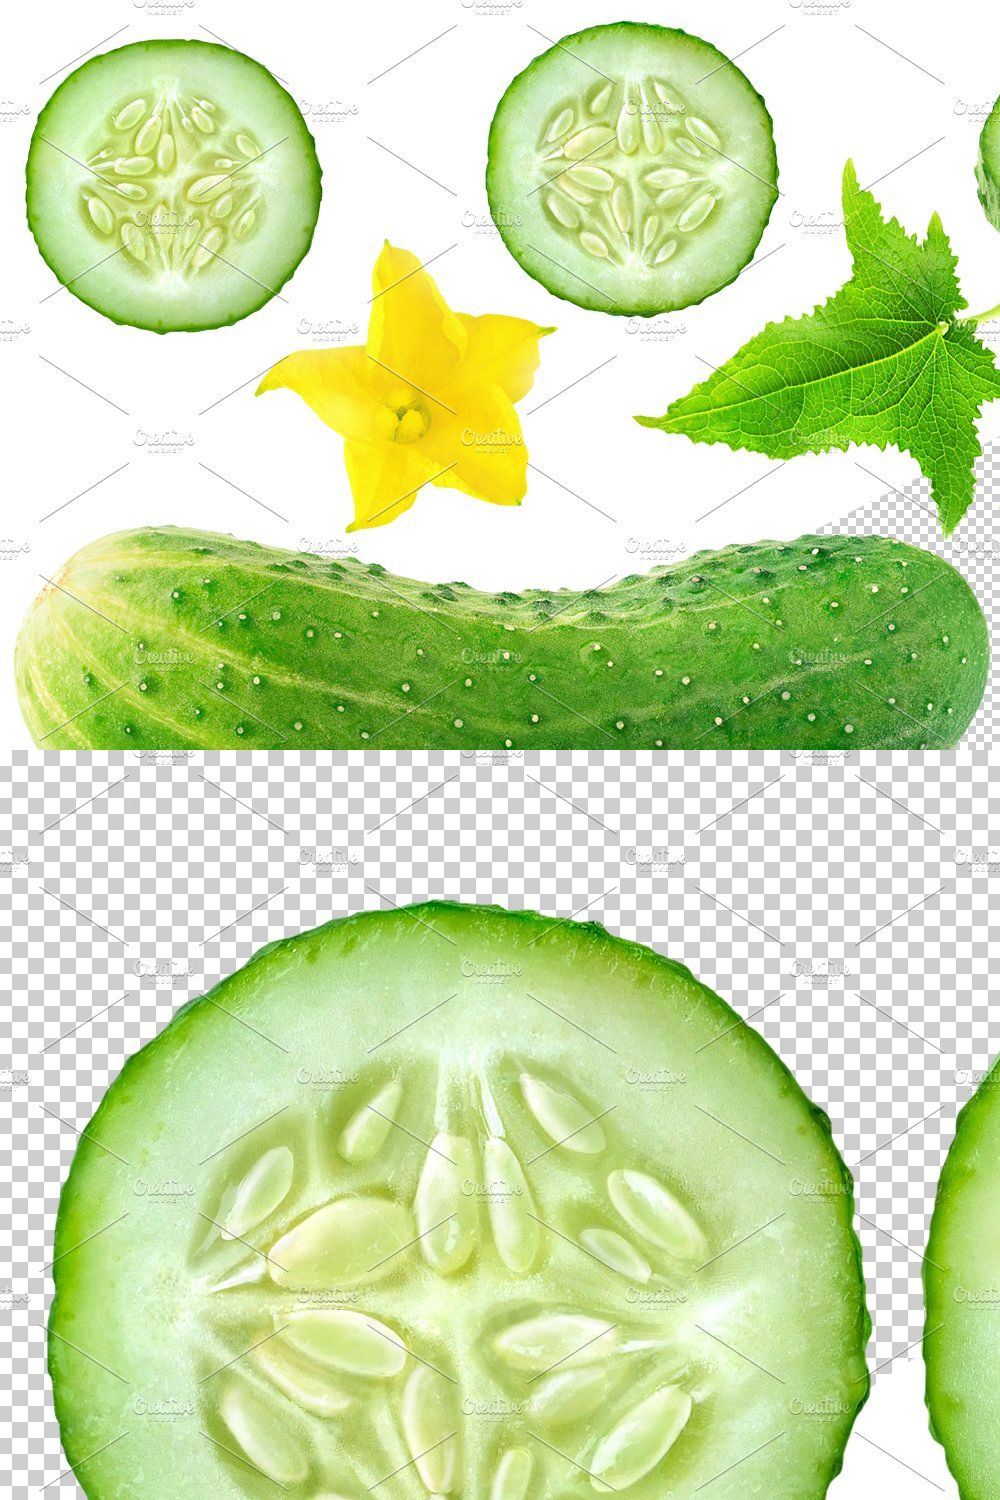 Cucumber pieces, leaves and flower pinterest preview image.